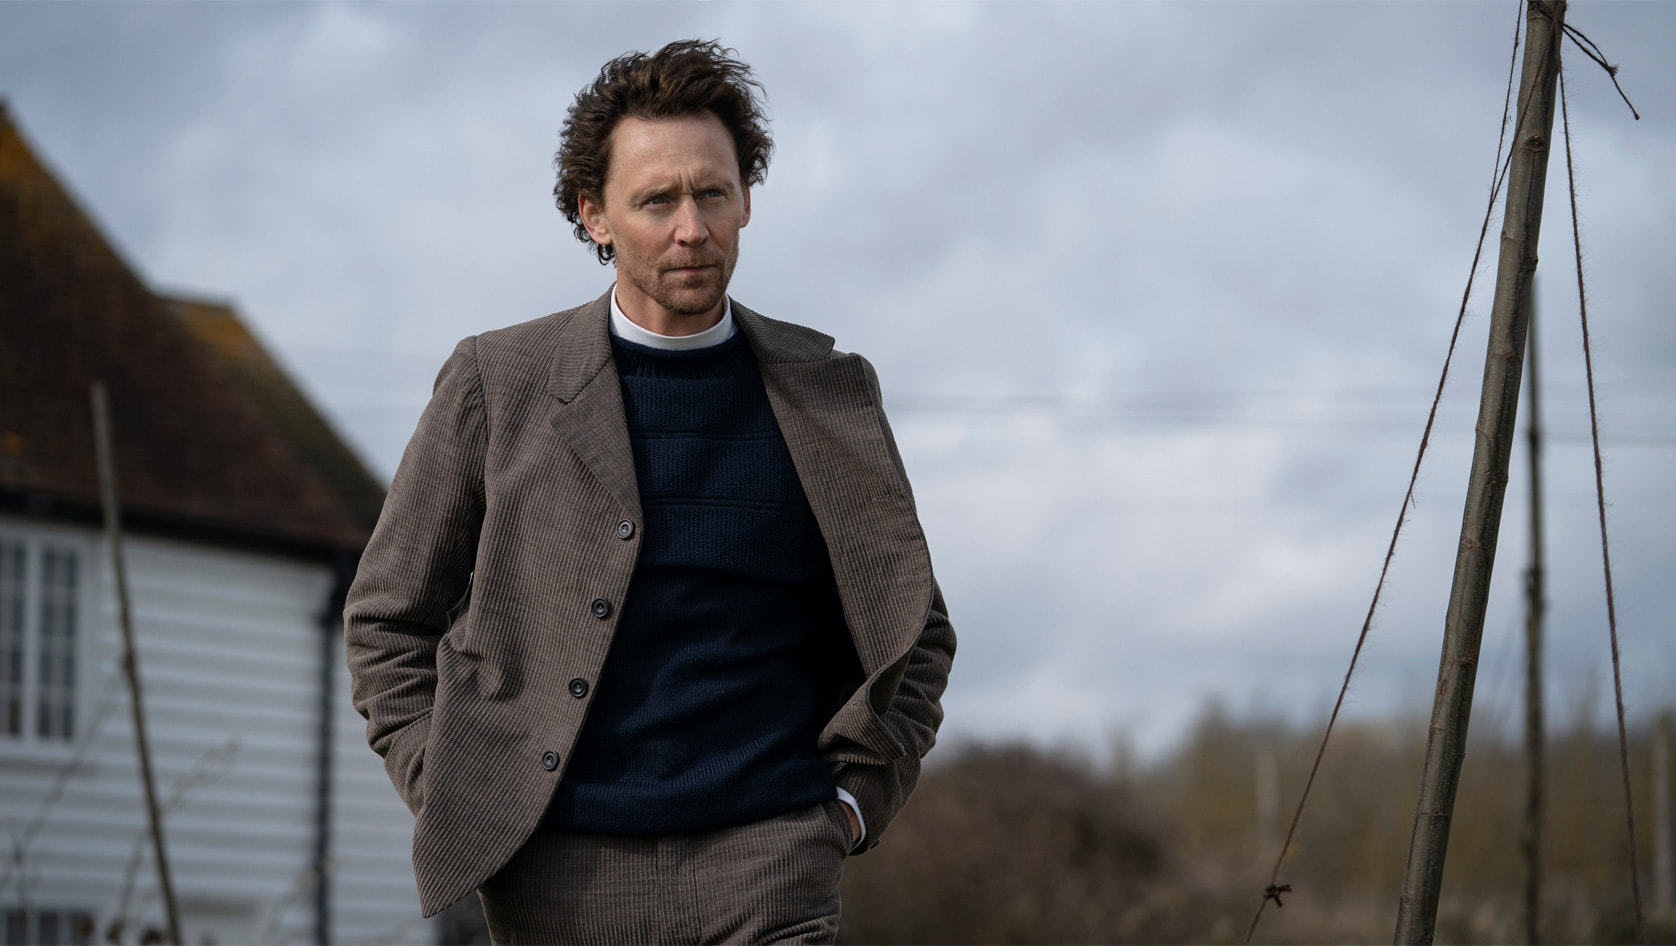 Star - Tom Hiddleston in The Essex Serpent premiering globally May 13 on Apple TV+. Photo: Apple